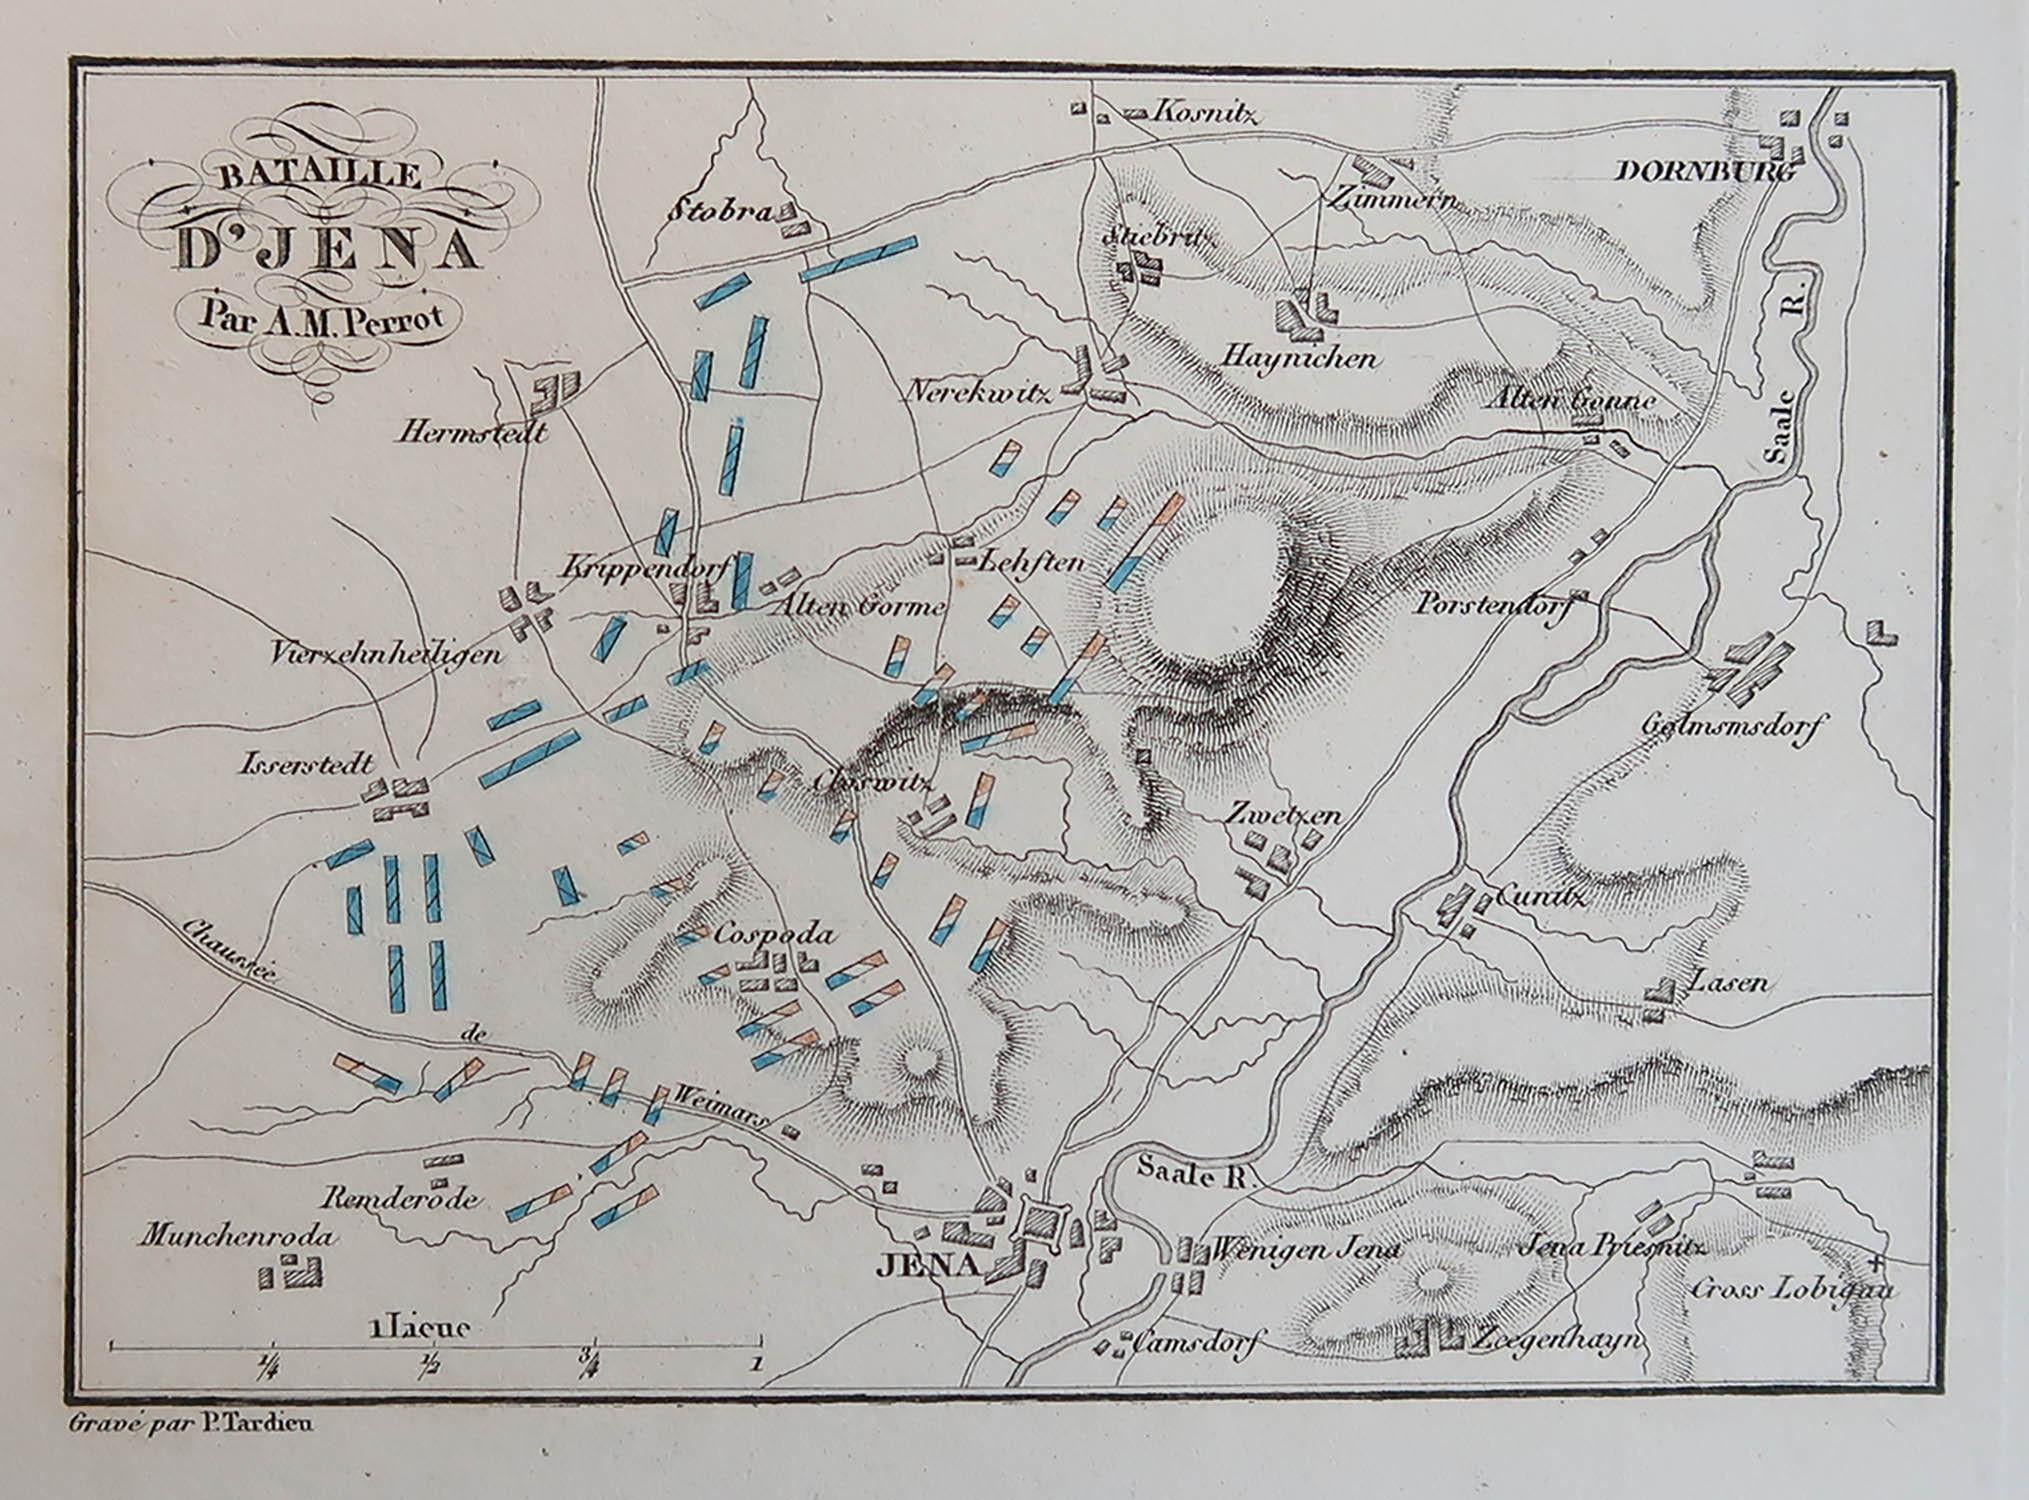 Great battle plan of The Battle of Jena-Auerstedt

Drawn by A.M Perrot

Steel engraving by Tardieu with original hand colour

Unframed.

The size given is the paper size